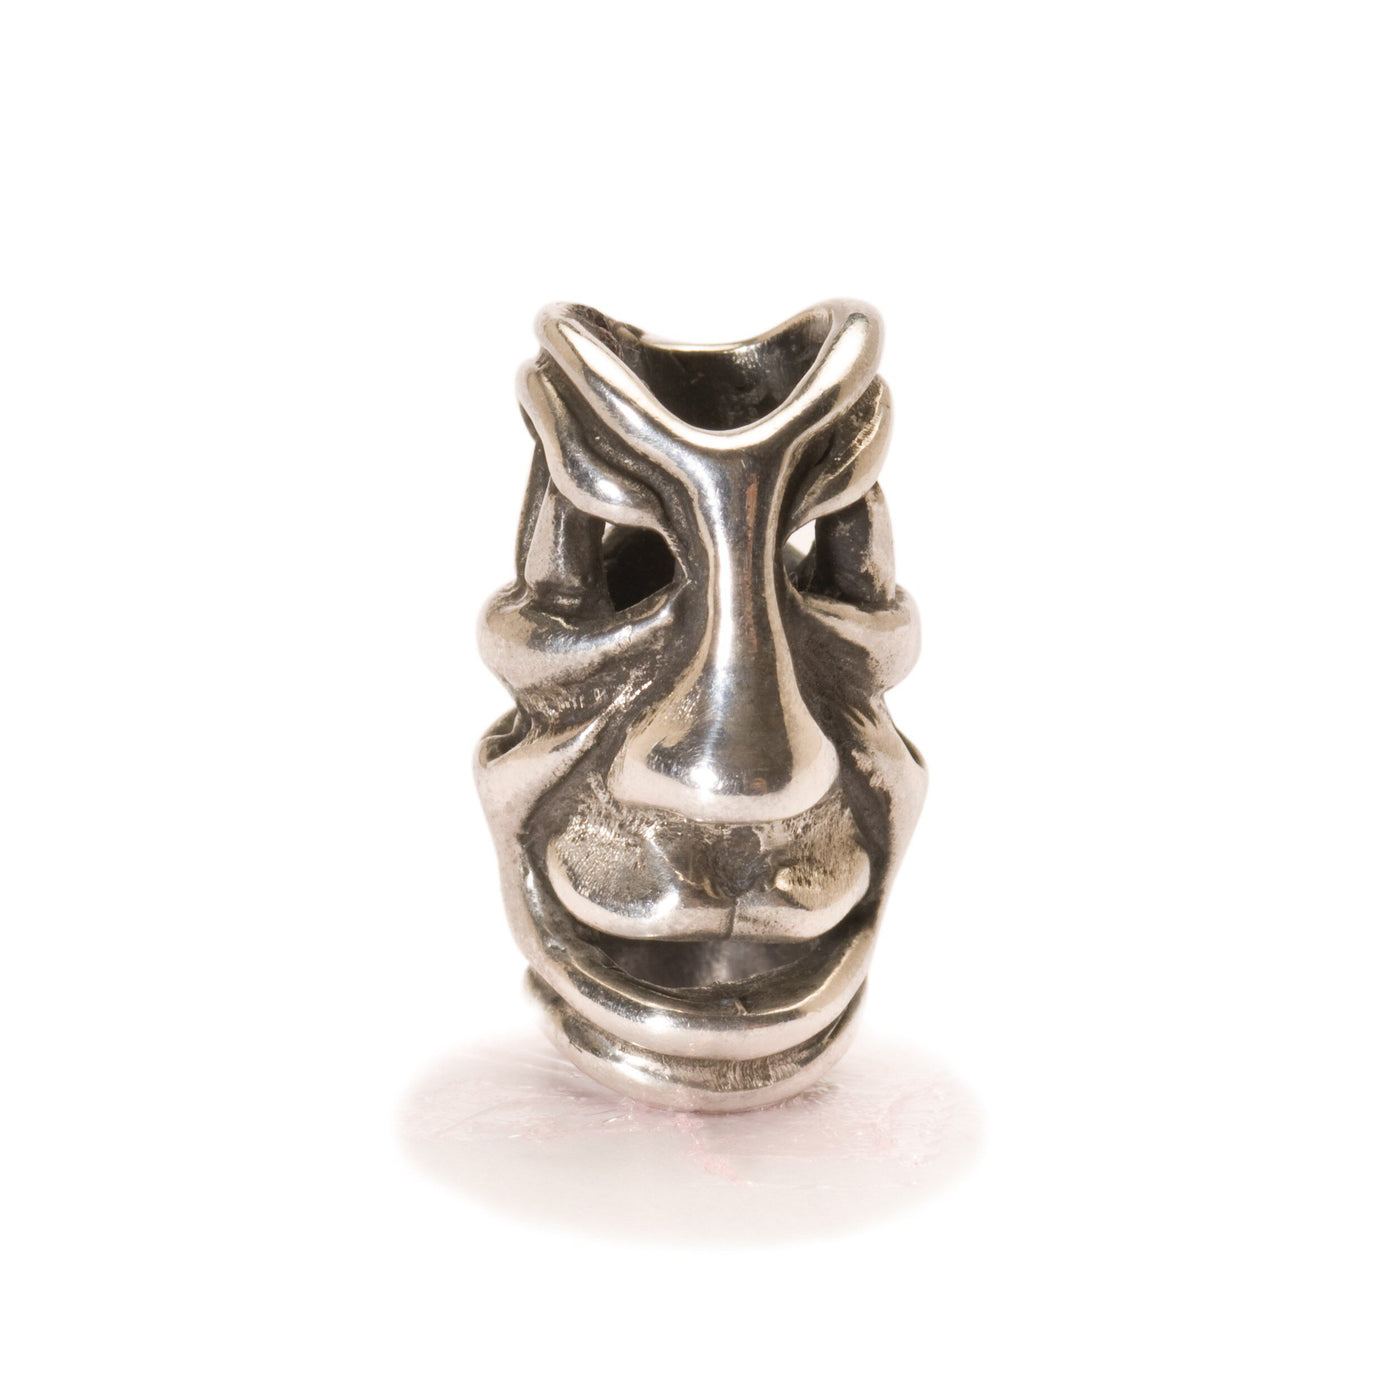 Fabled Faces - Trollbeads Canada